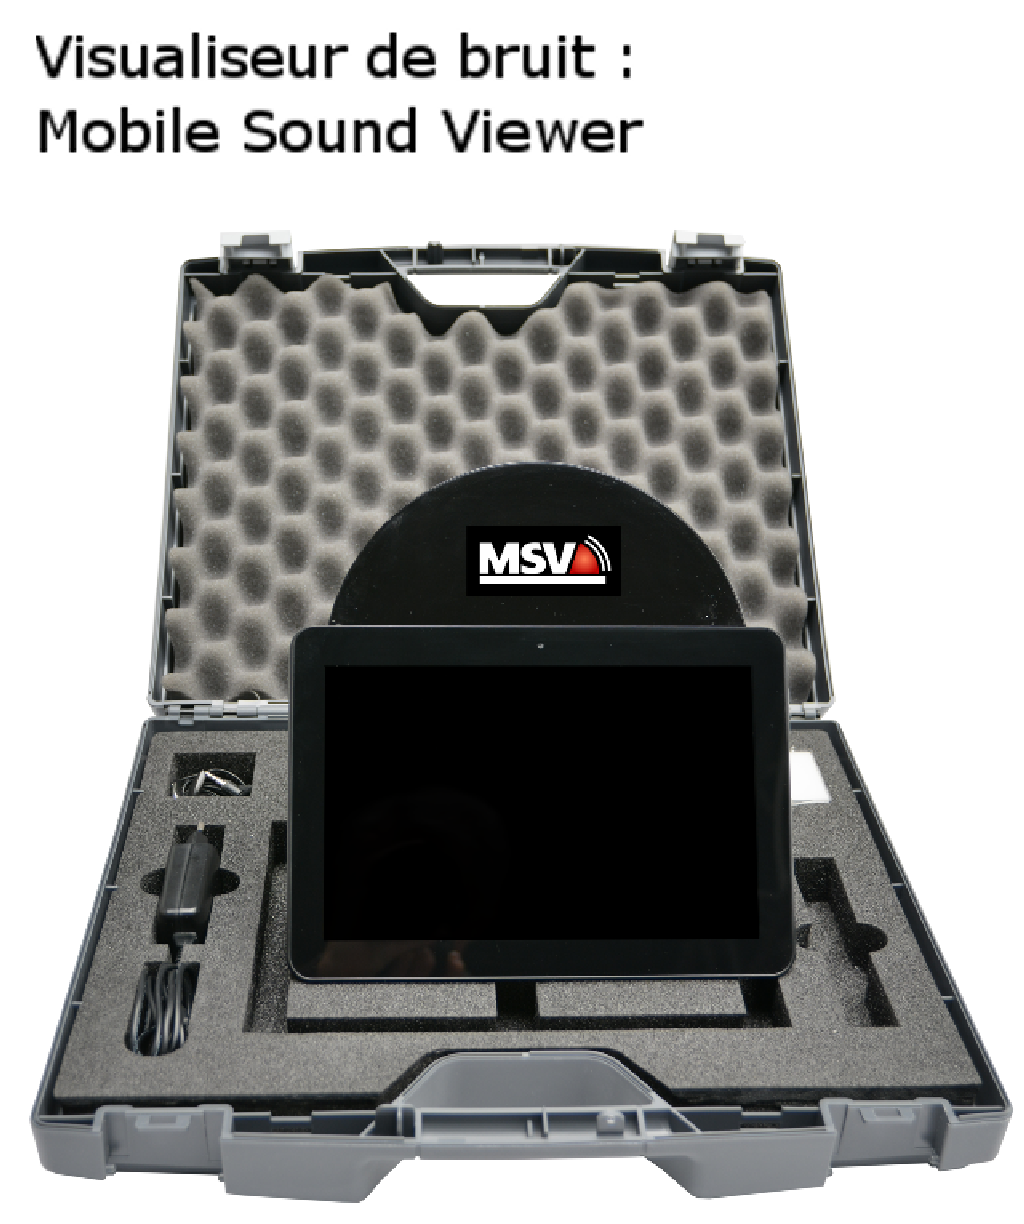 Mobile sound viewer_0